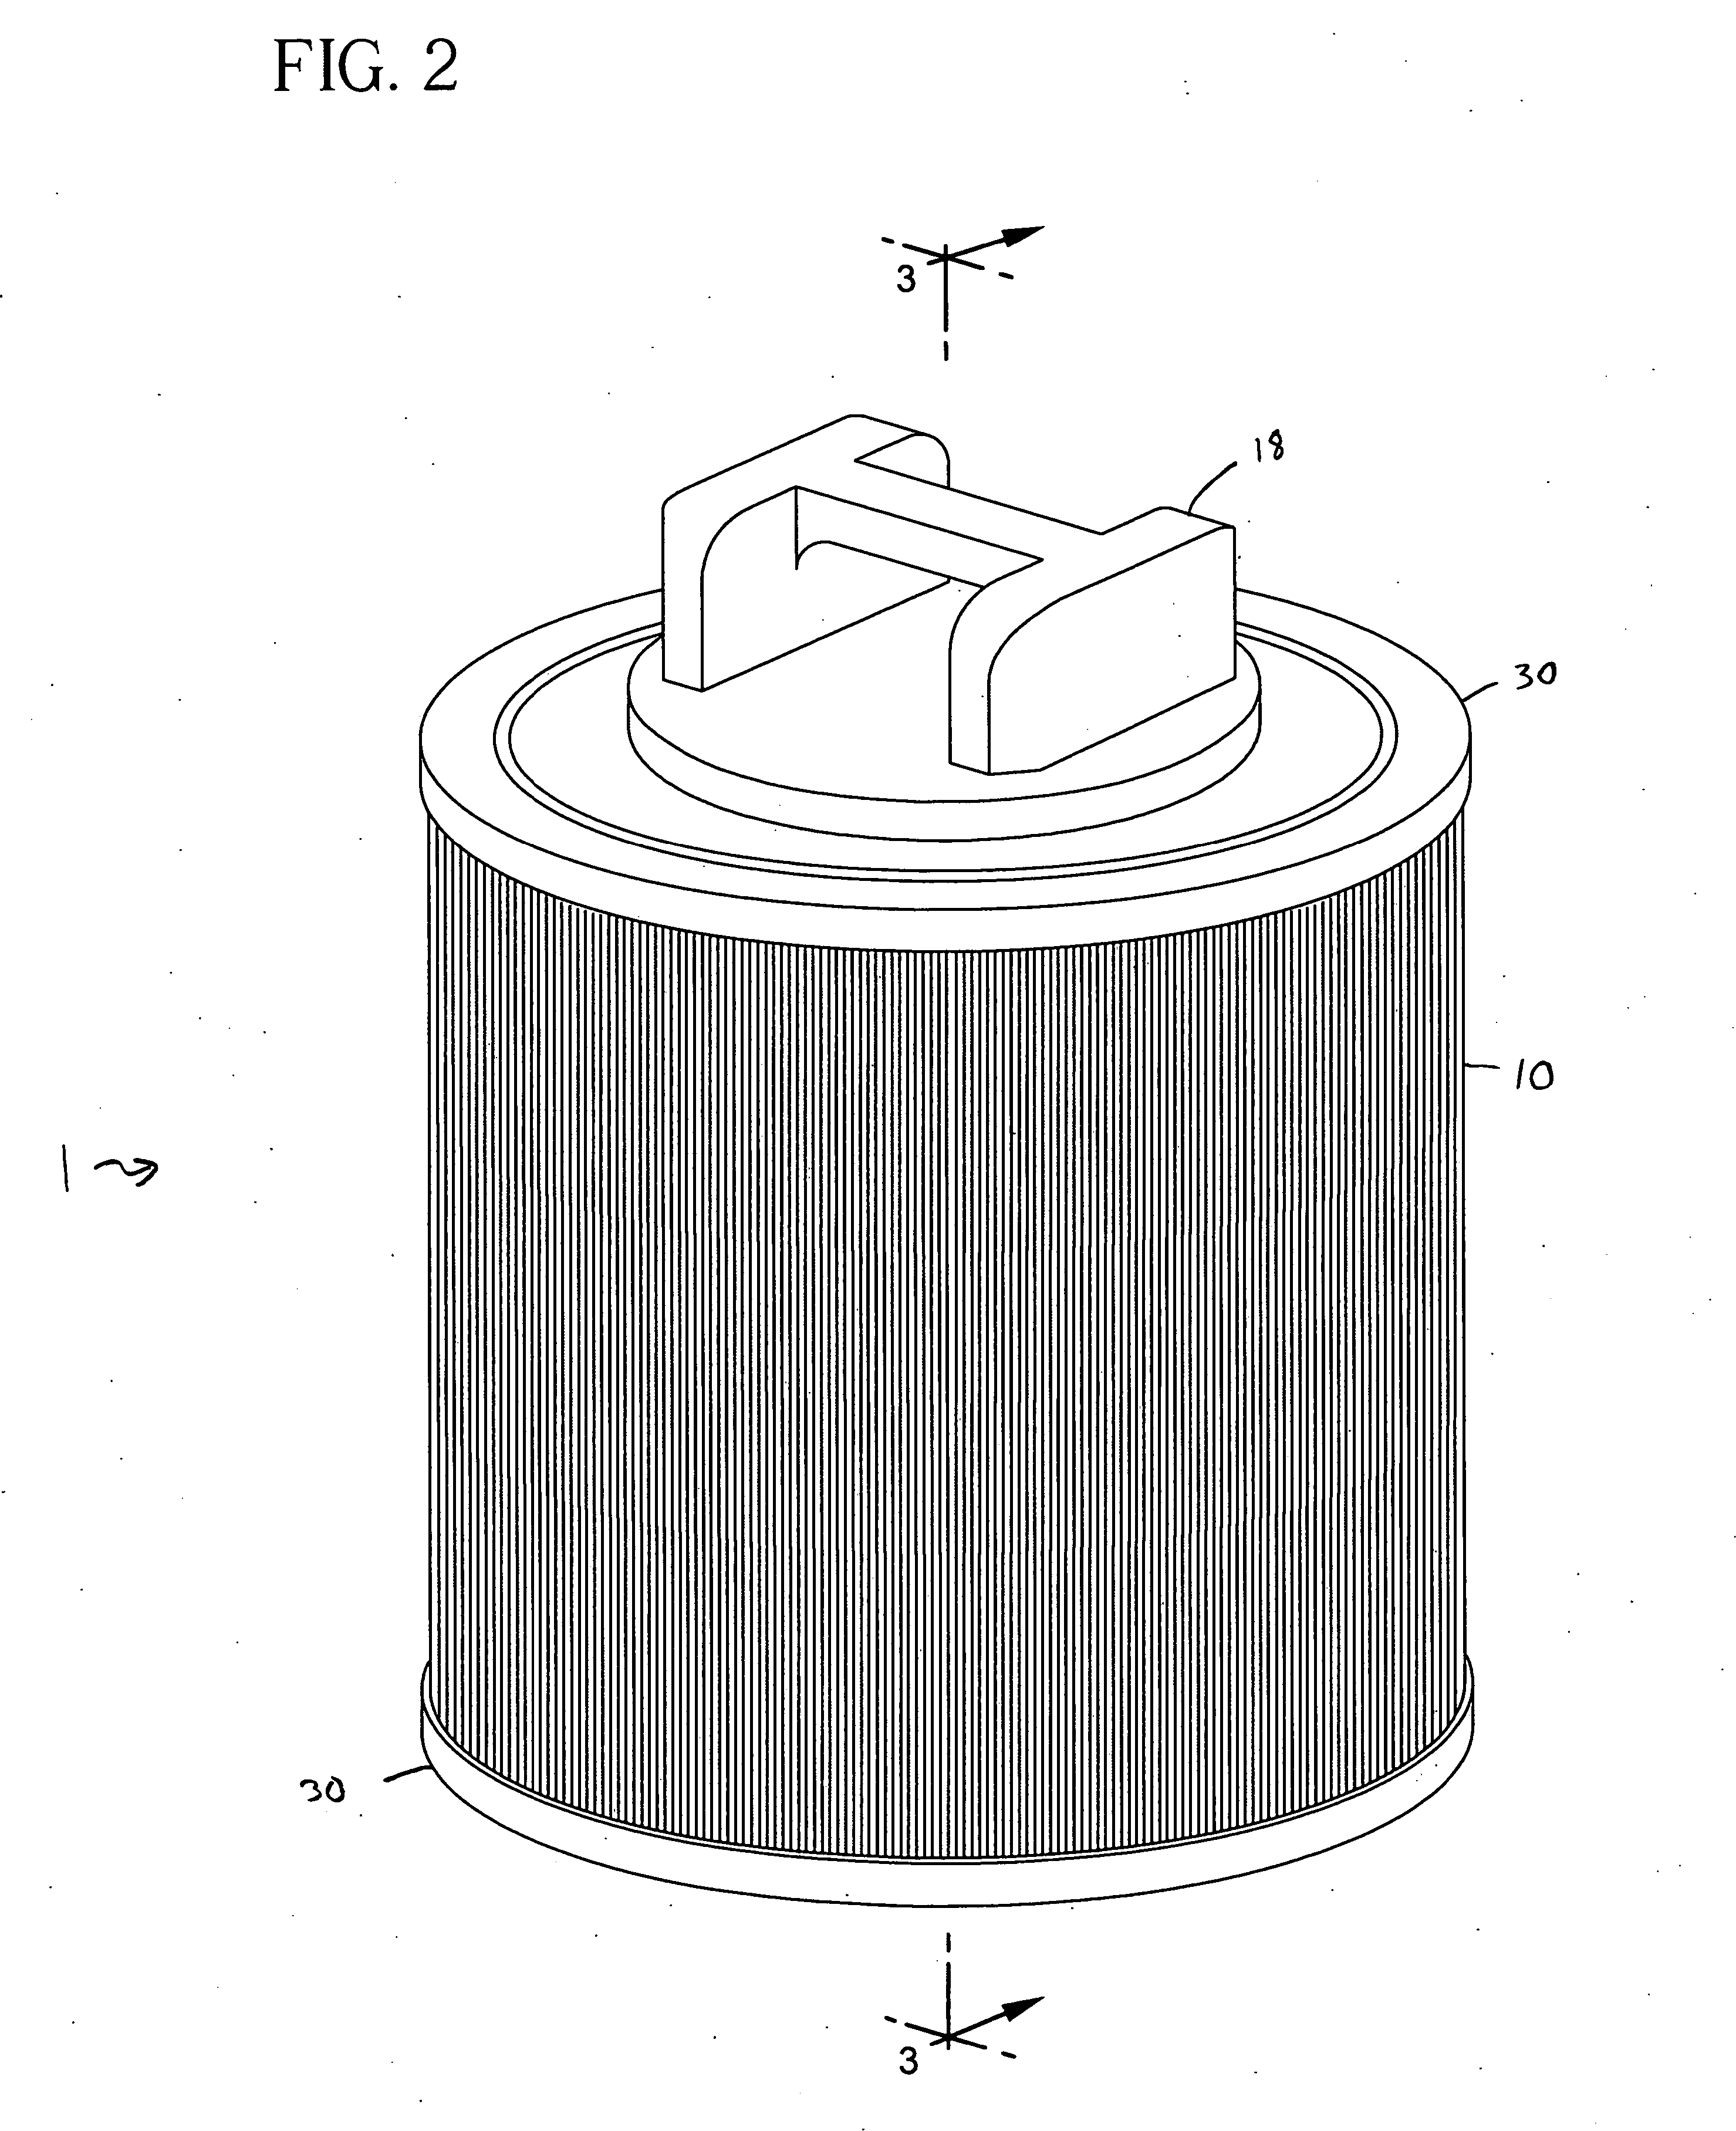 Replaceable tandem filter cartridge assembly